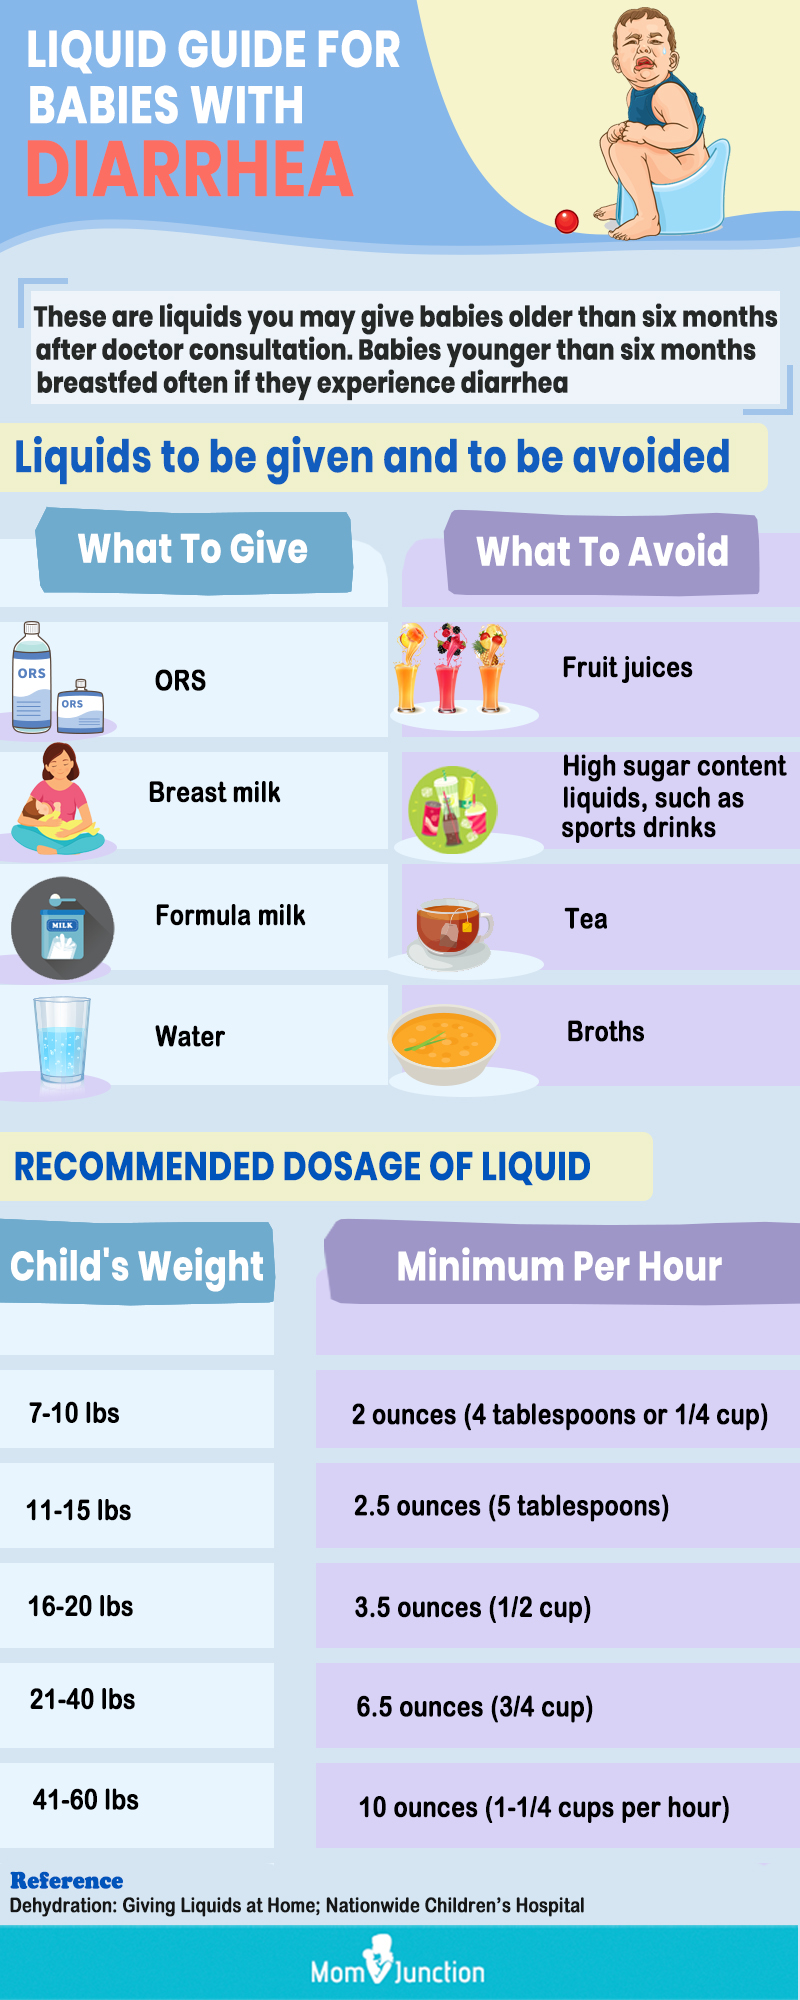 liquids guide for babies with diarrhea (infographic)